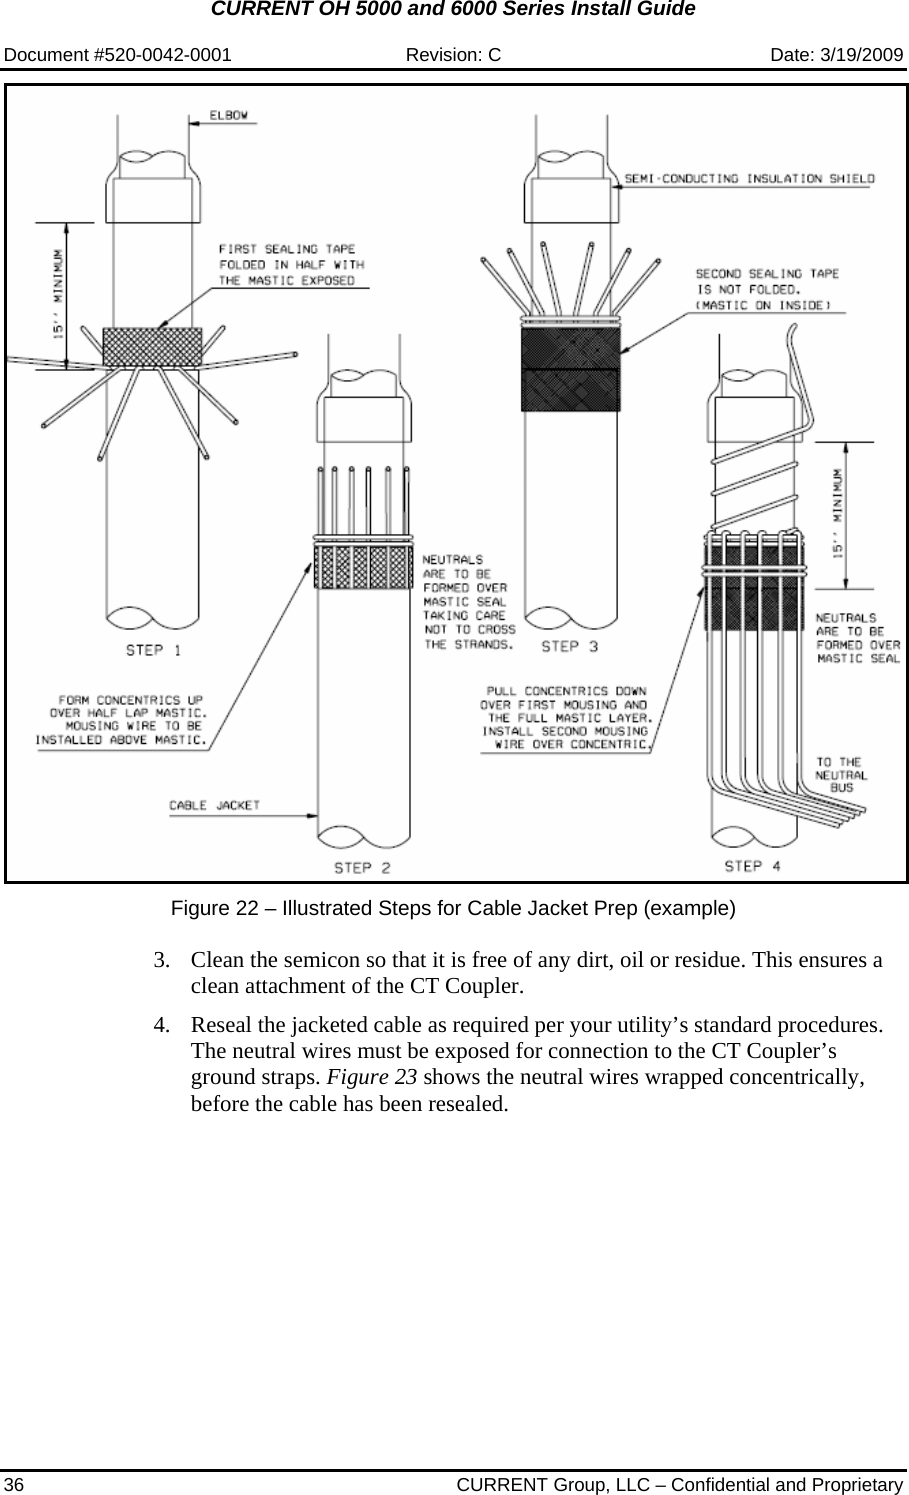 CURRENT OH 5000 and 6000 Series Install Guide  Document #520-0042-0001  Revision: C  Date: 3/19/2009 36  CURRENT Group, LLC – Confidential and Proprietary    Figure 22 – Illustrated Steps for Cable Jacket Prep (example)  3. Clean the semicon so that it is free of any dirt, oil or residue. This ensures a clean attachment of the CT Coupler.  4. Reseal the jacketed cable as required per your utility’s standard procedures. The neutral wires must be exposed for connection to the CT Coupler’s ground straps. Figure 23 shows the neutral wires wrapped concentrically, before the cable has been resealed.  